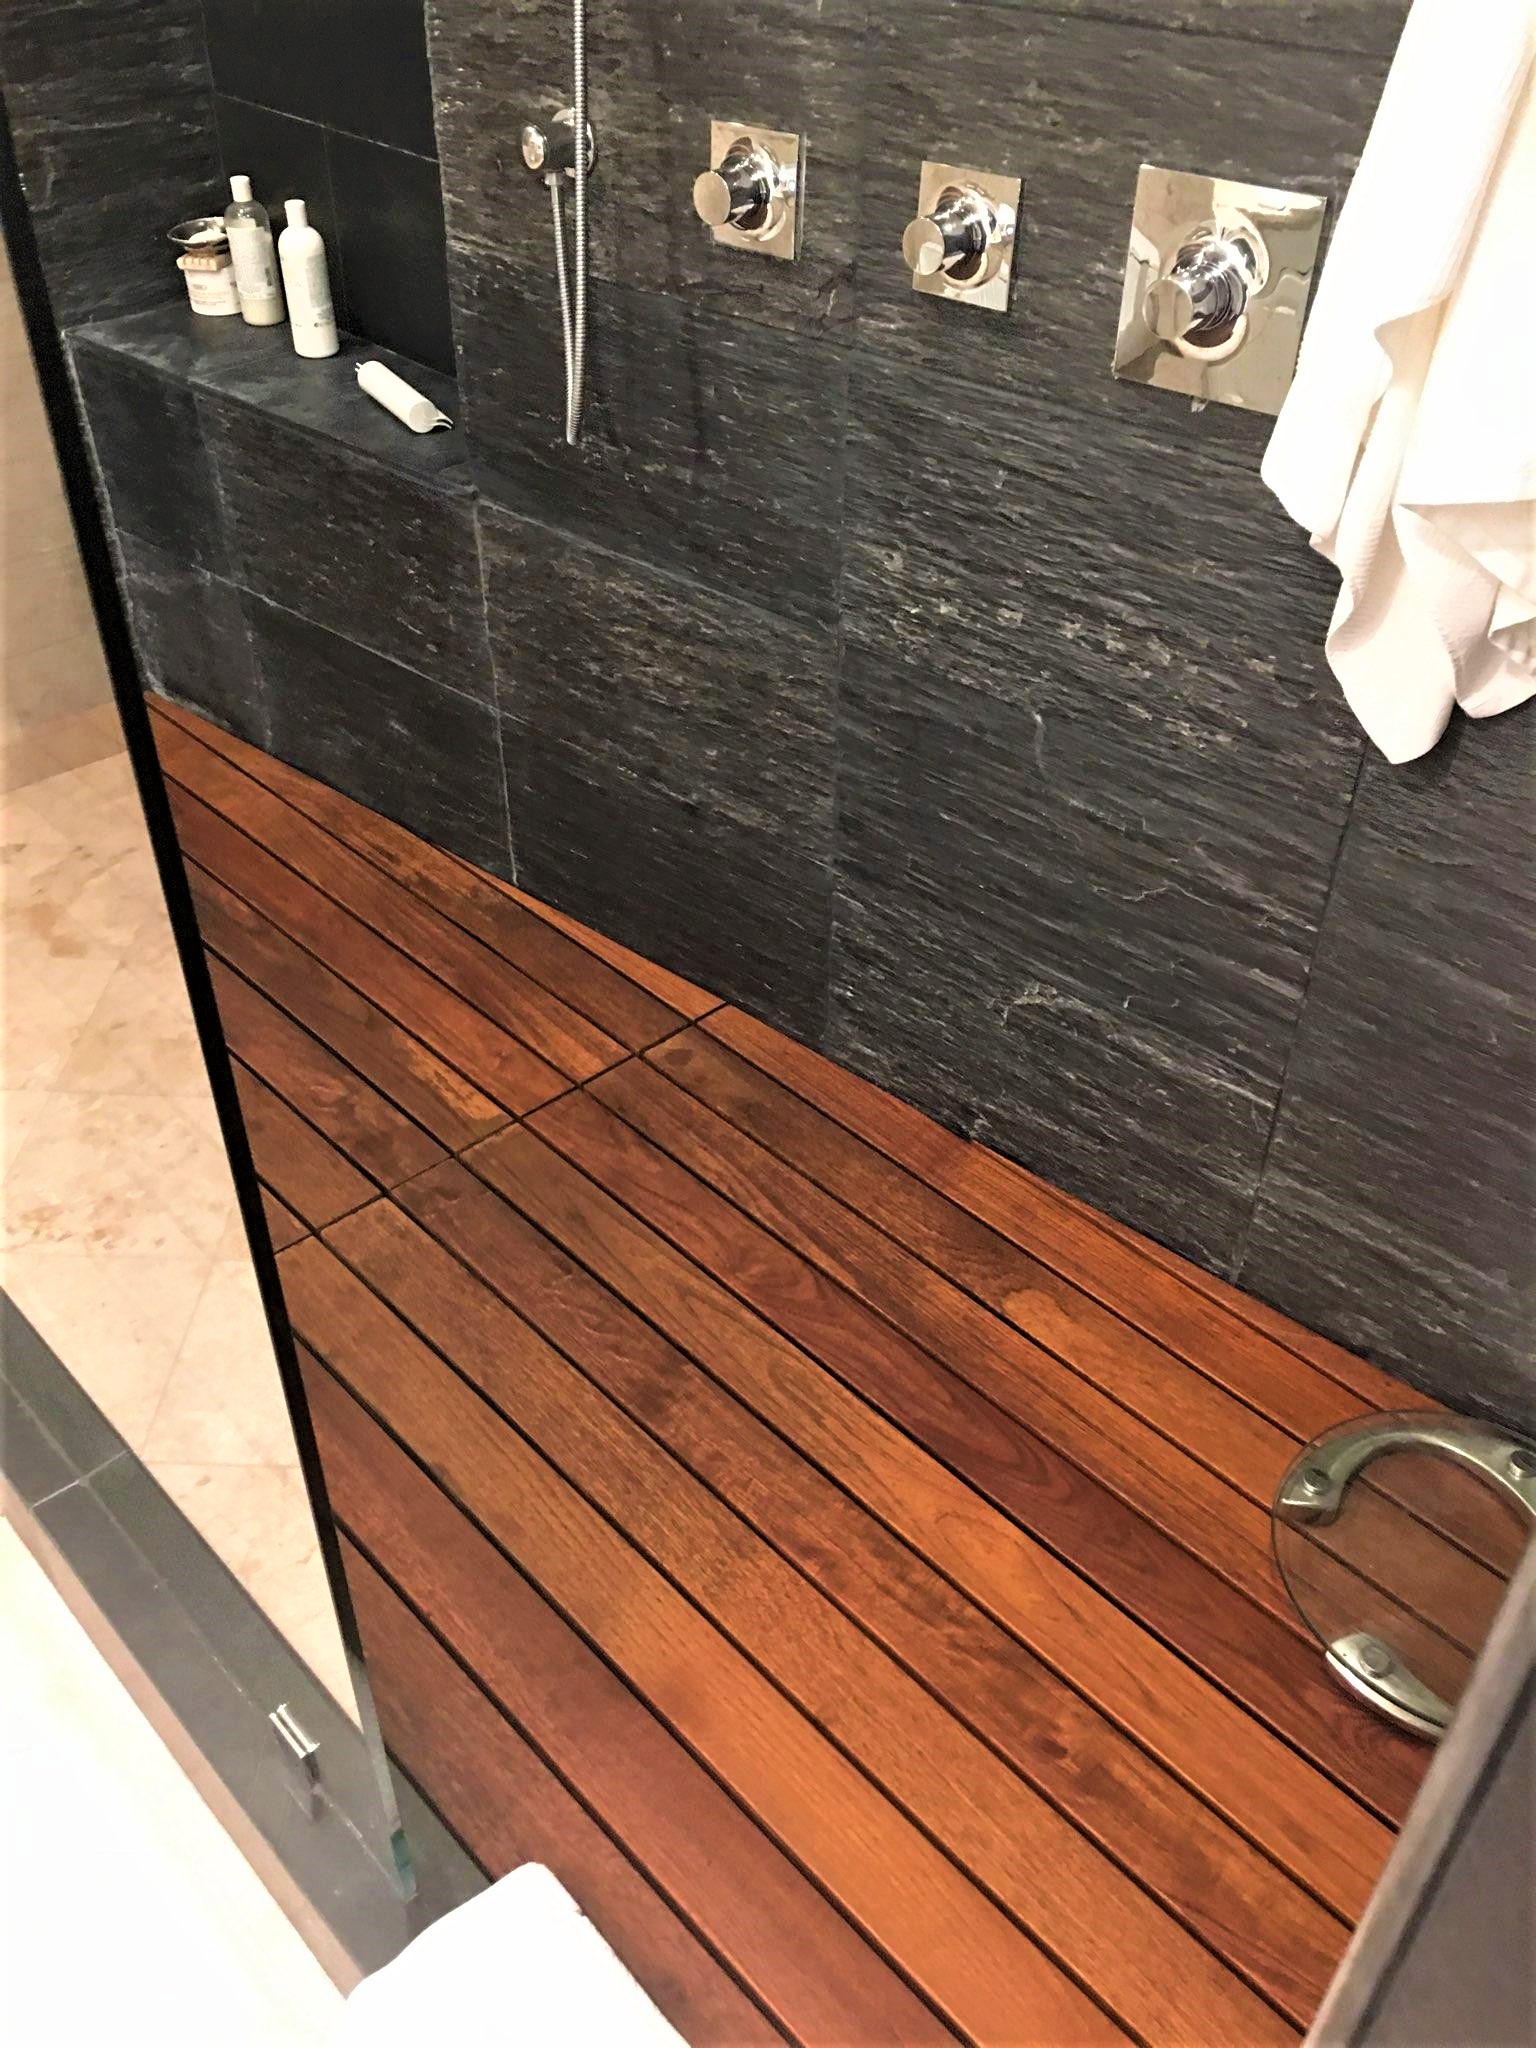 New Life For A Teak Wood Shower Floor The Larkin Painting Company